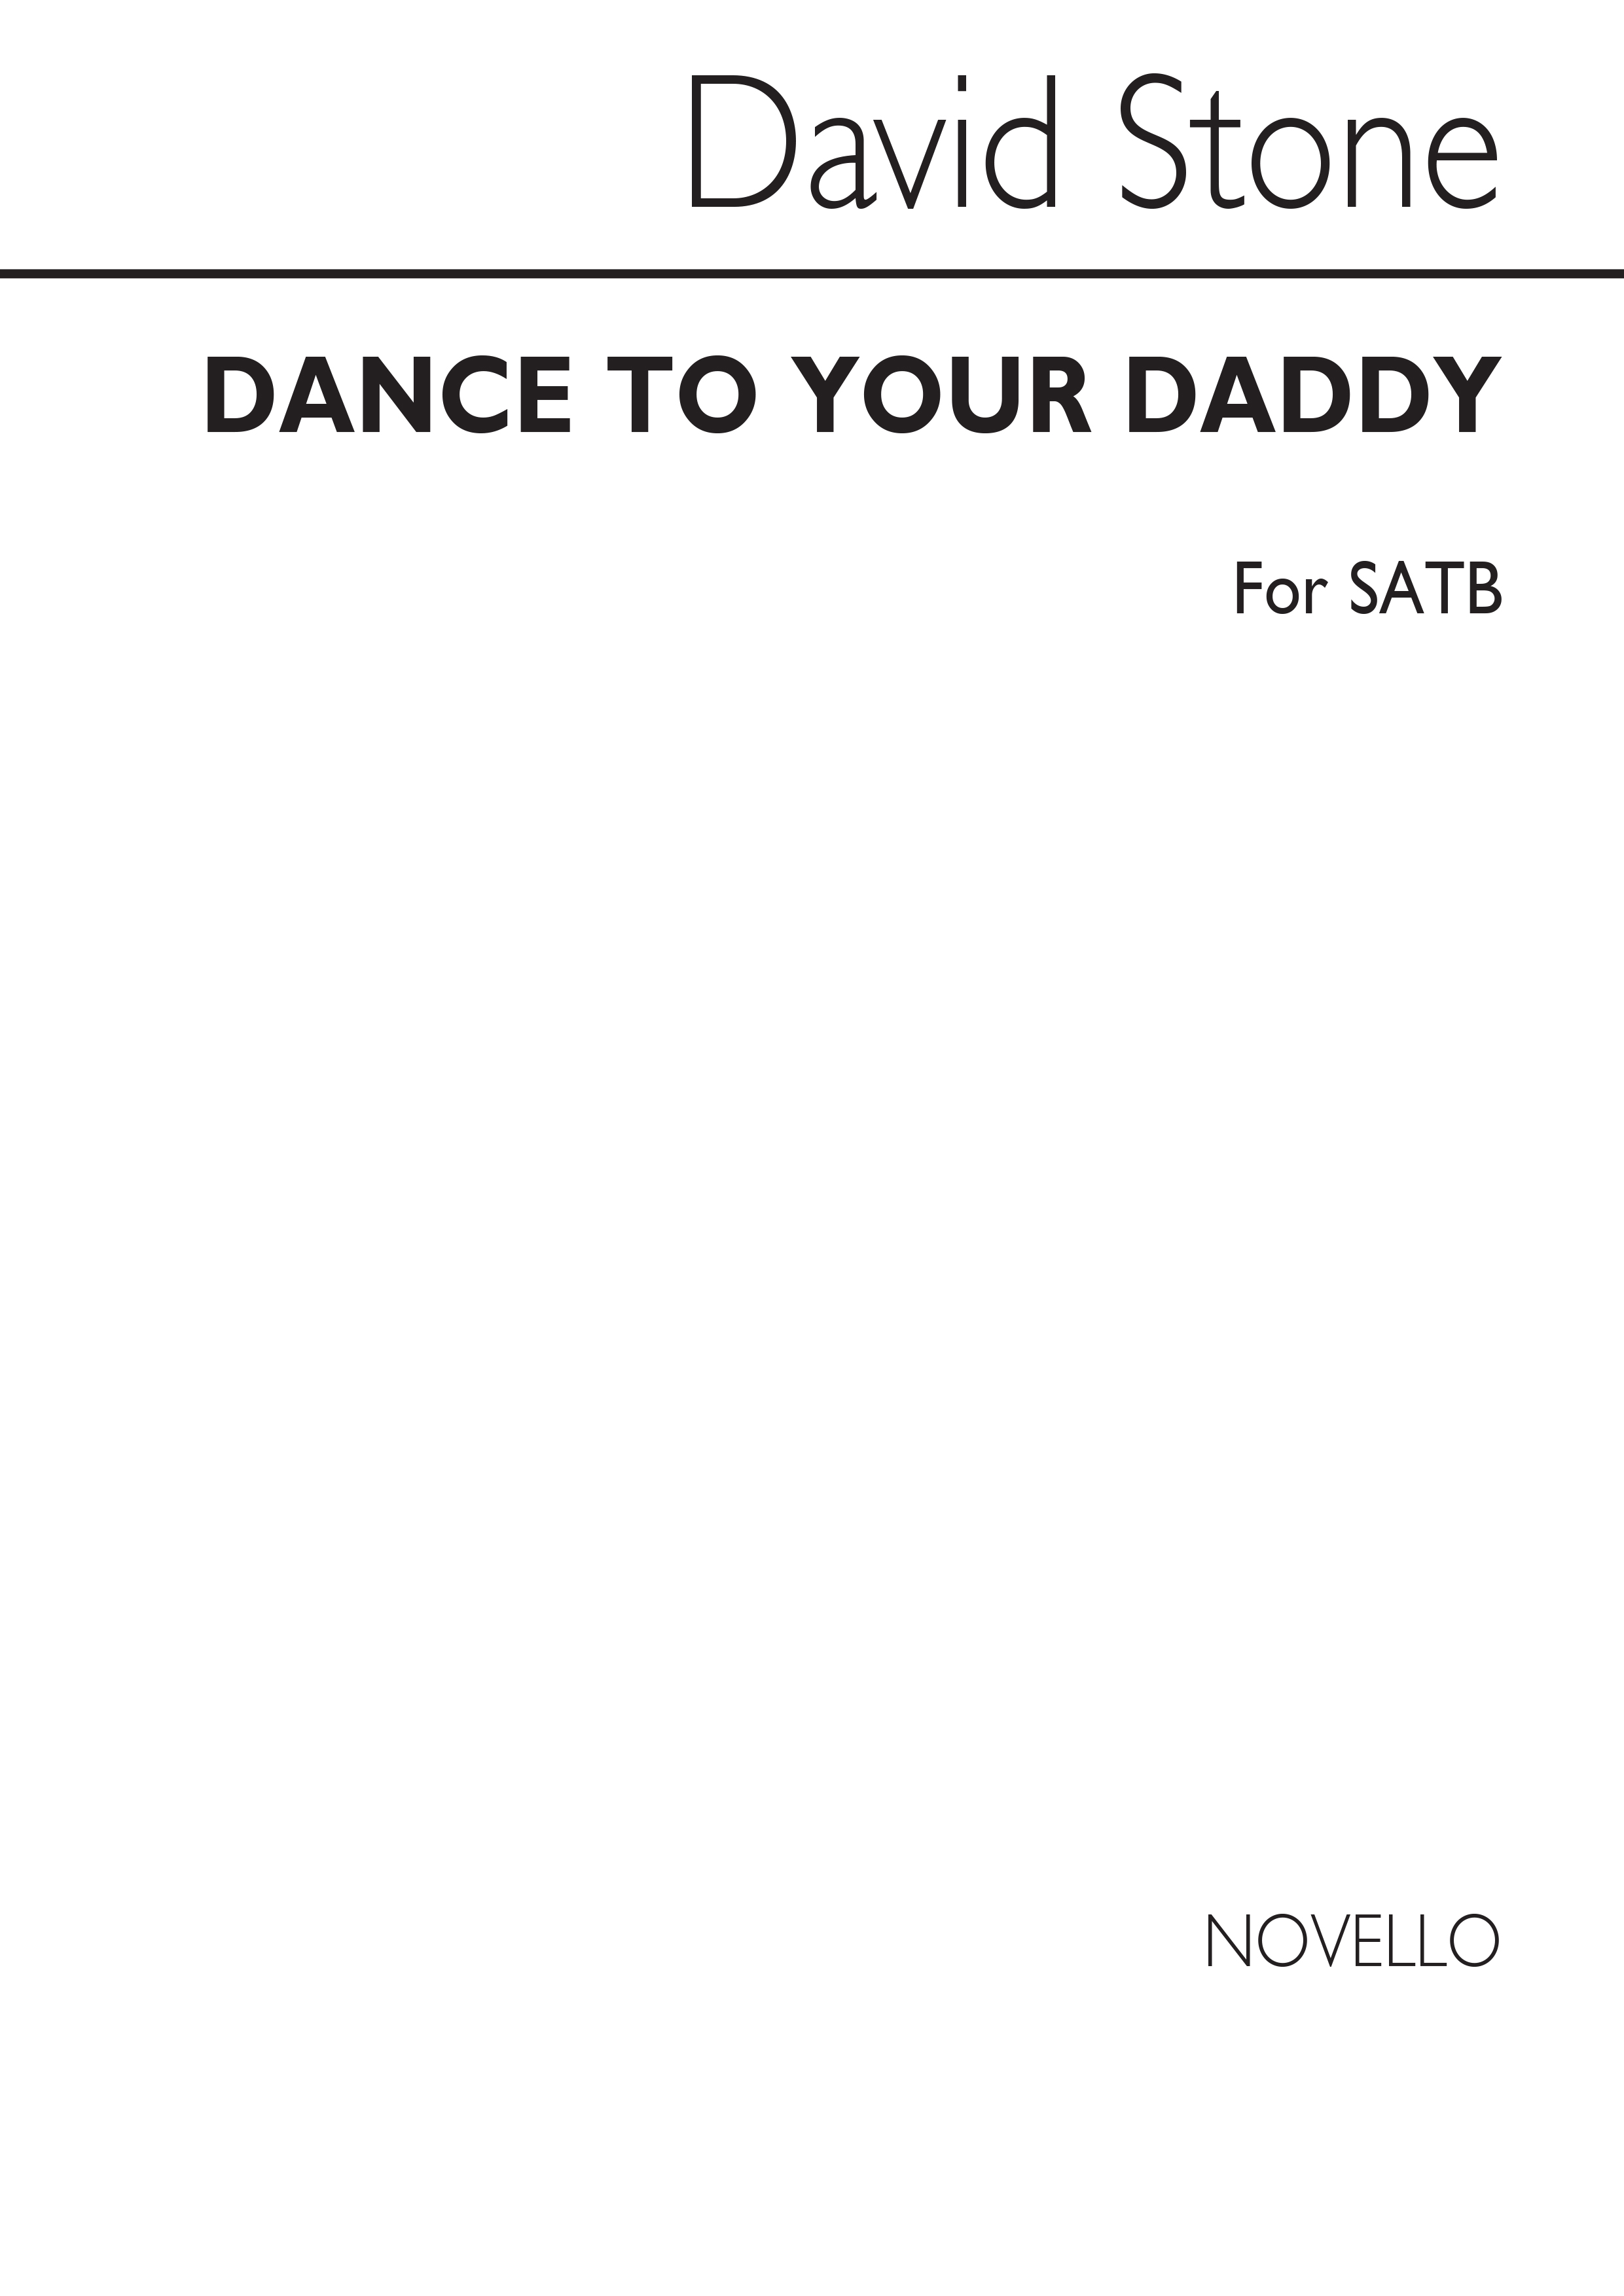 David Stone: Dance To Your Daddy - SATB